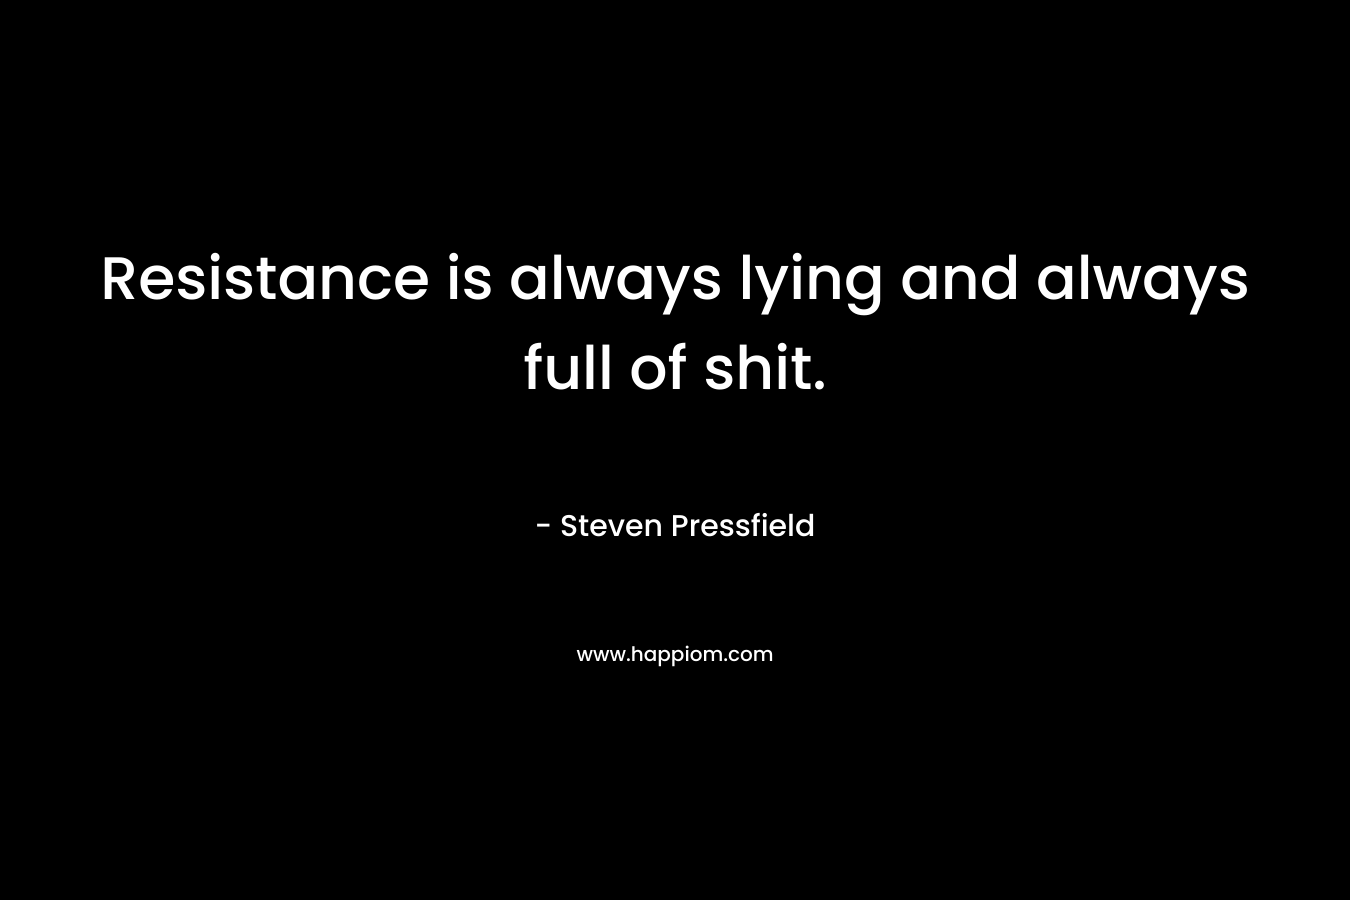 Resistance is always lying and always full of shit. – Steven Pressfield